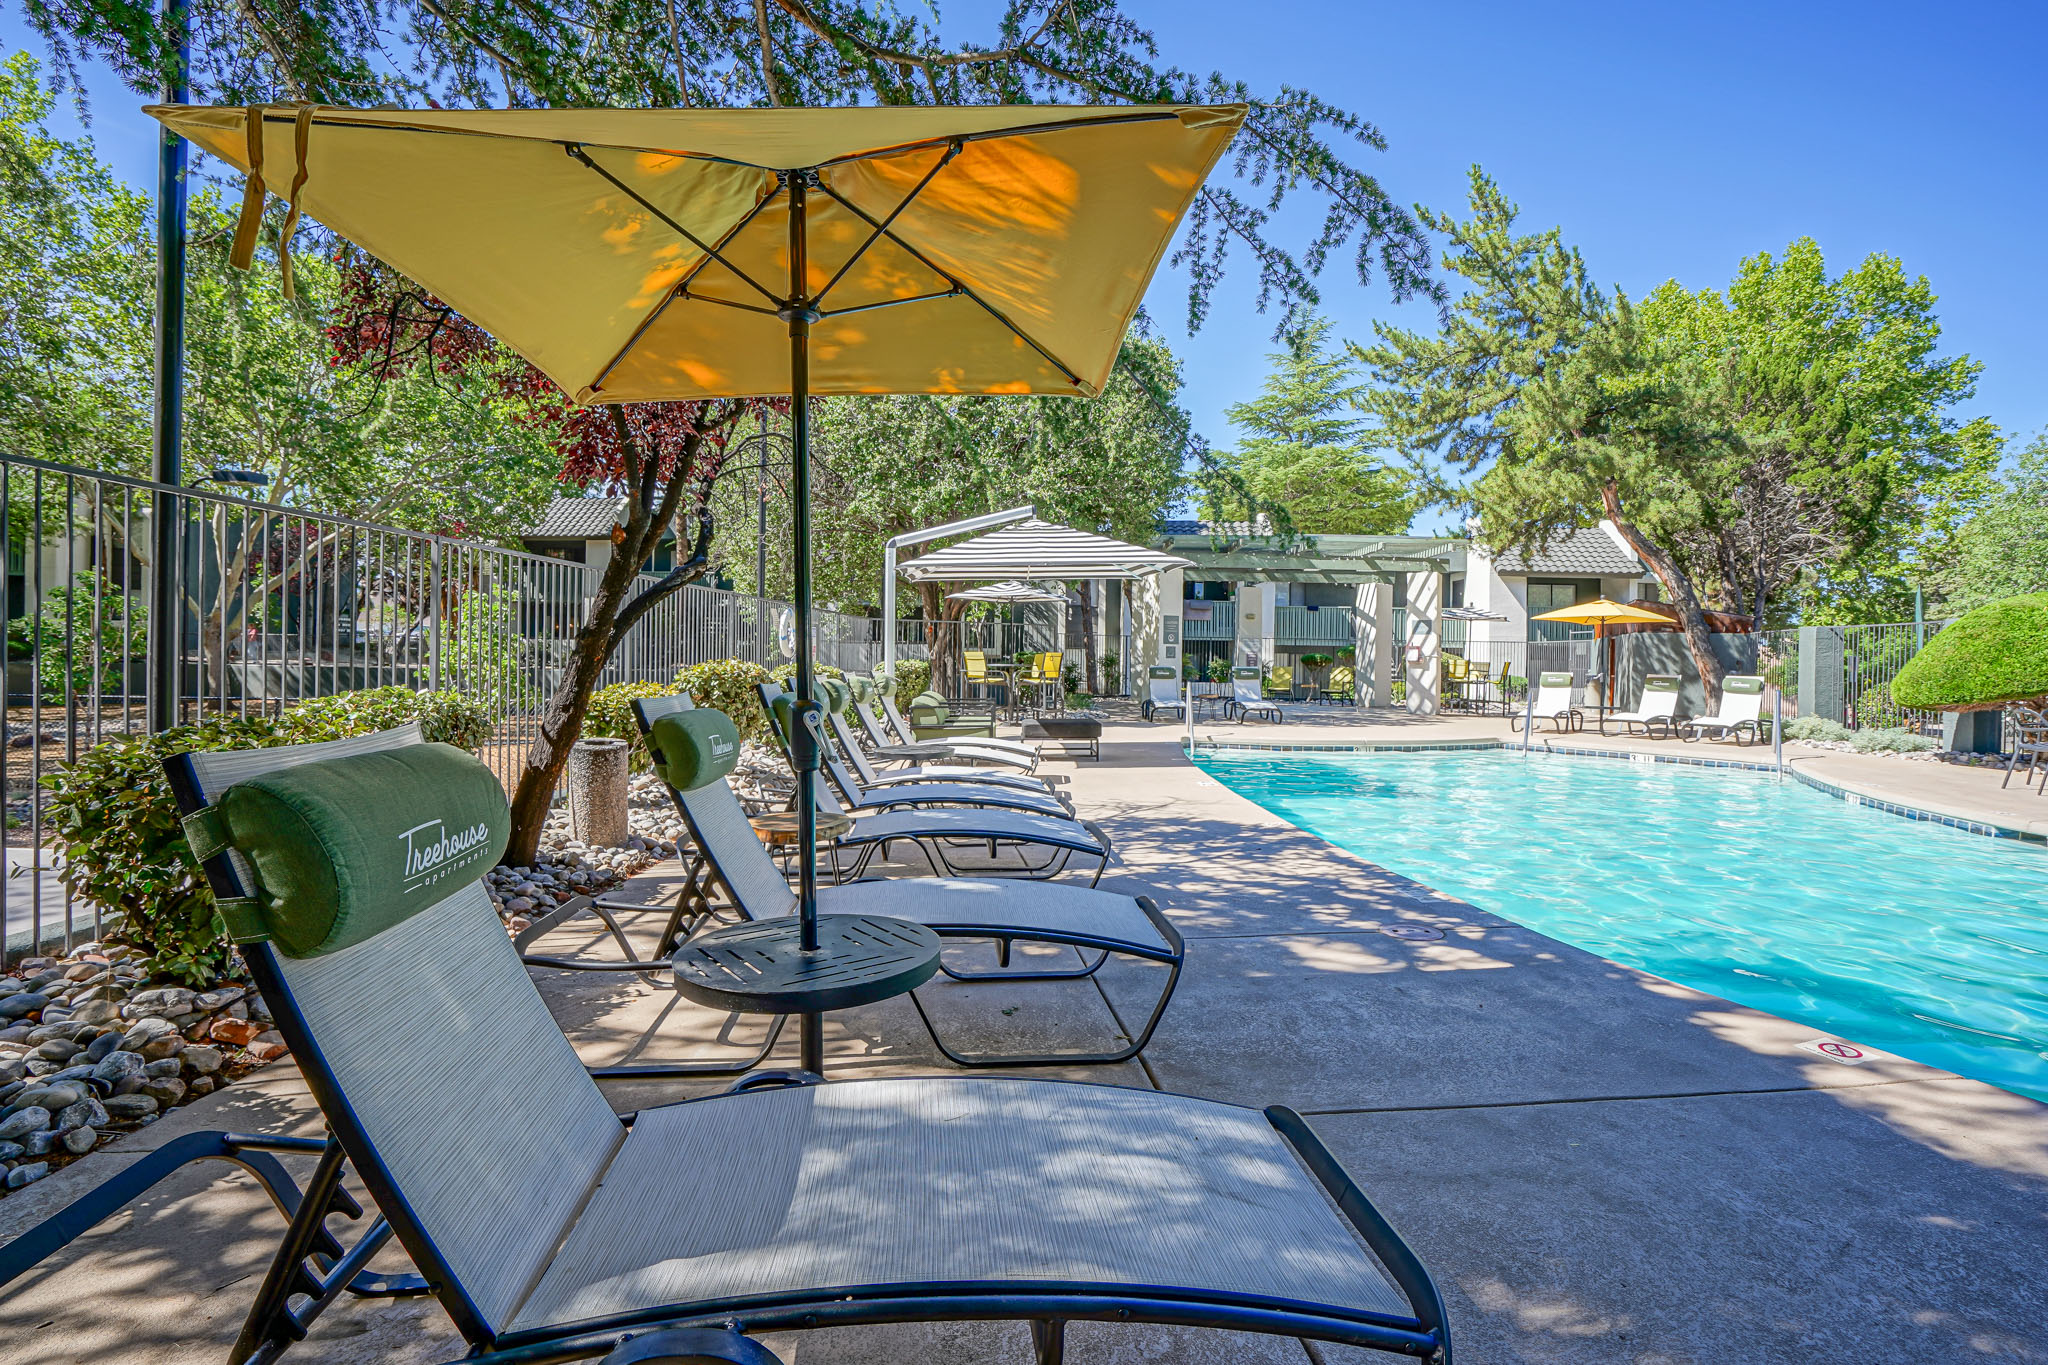 Poolside lounge with resort-style furniture at Treehouse Apartments in Albuquerque, New Mexico